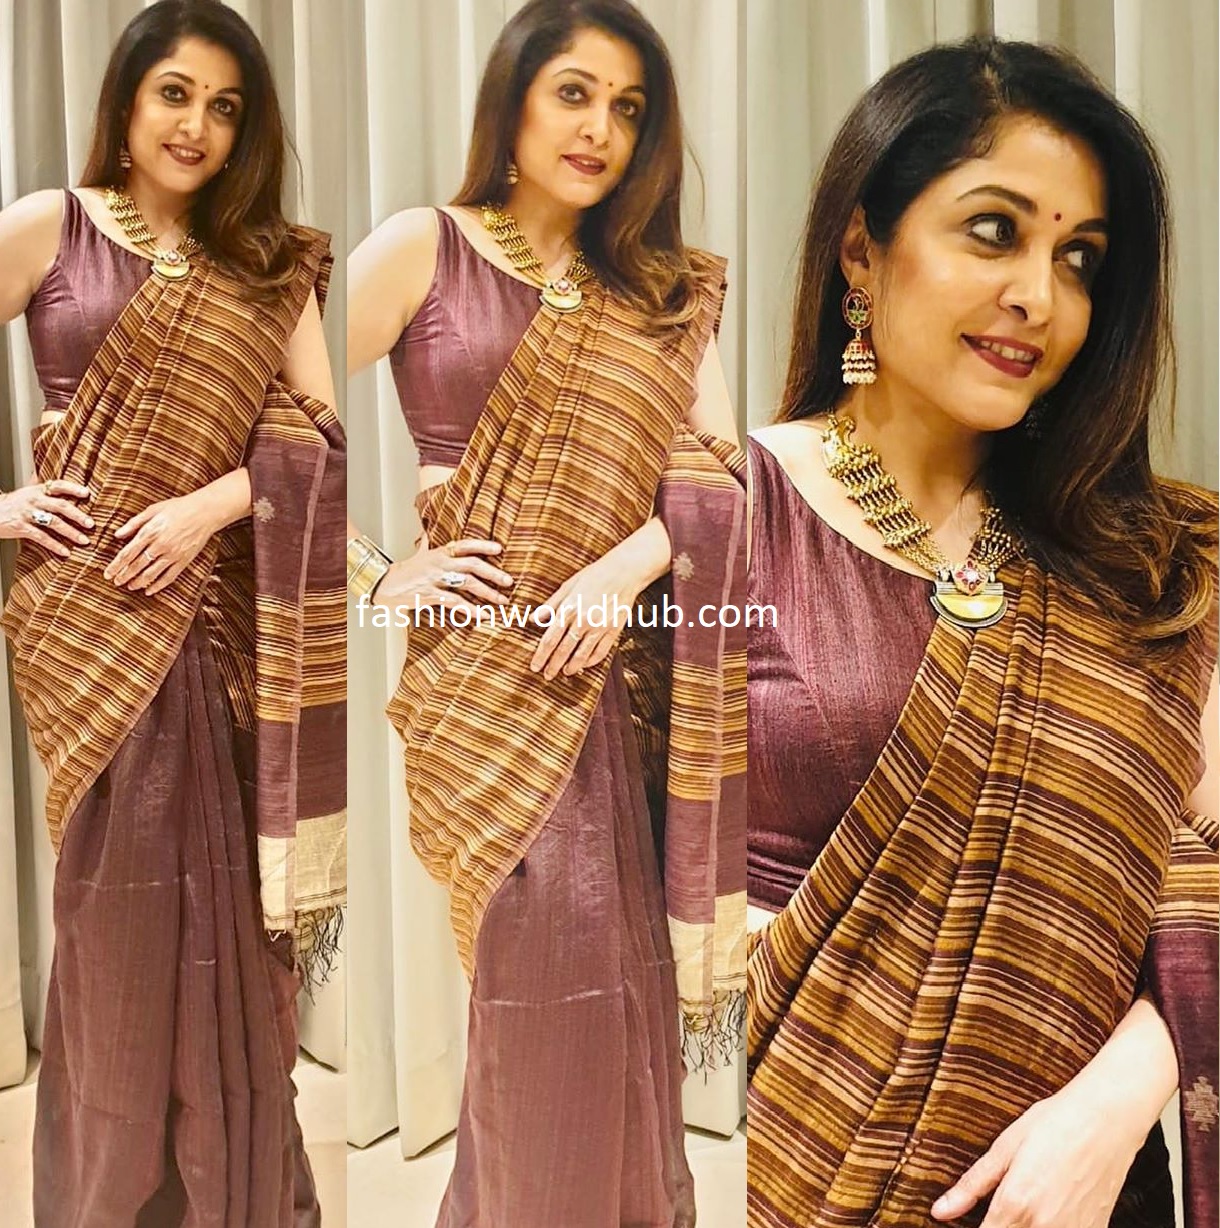 Ramya Krishnan is an epitome of grace in a silver saree for 